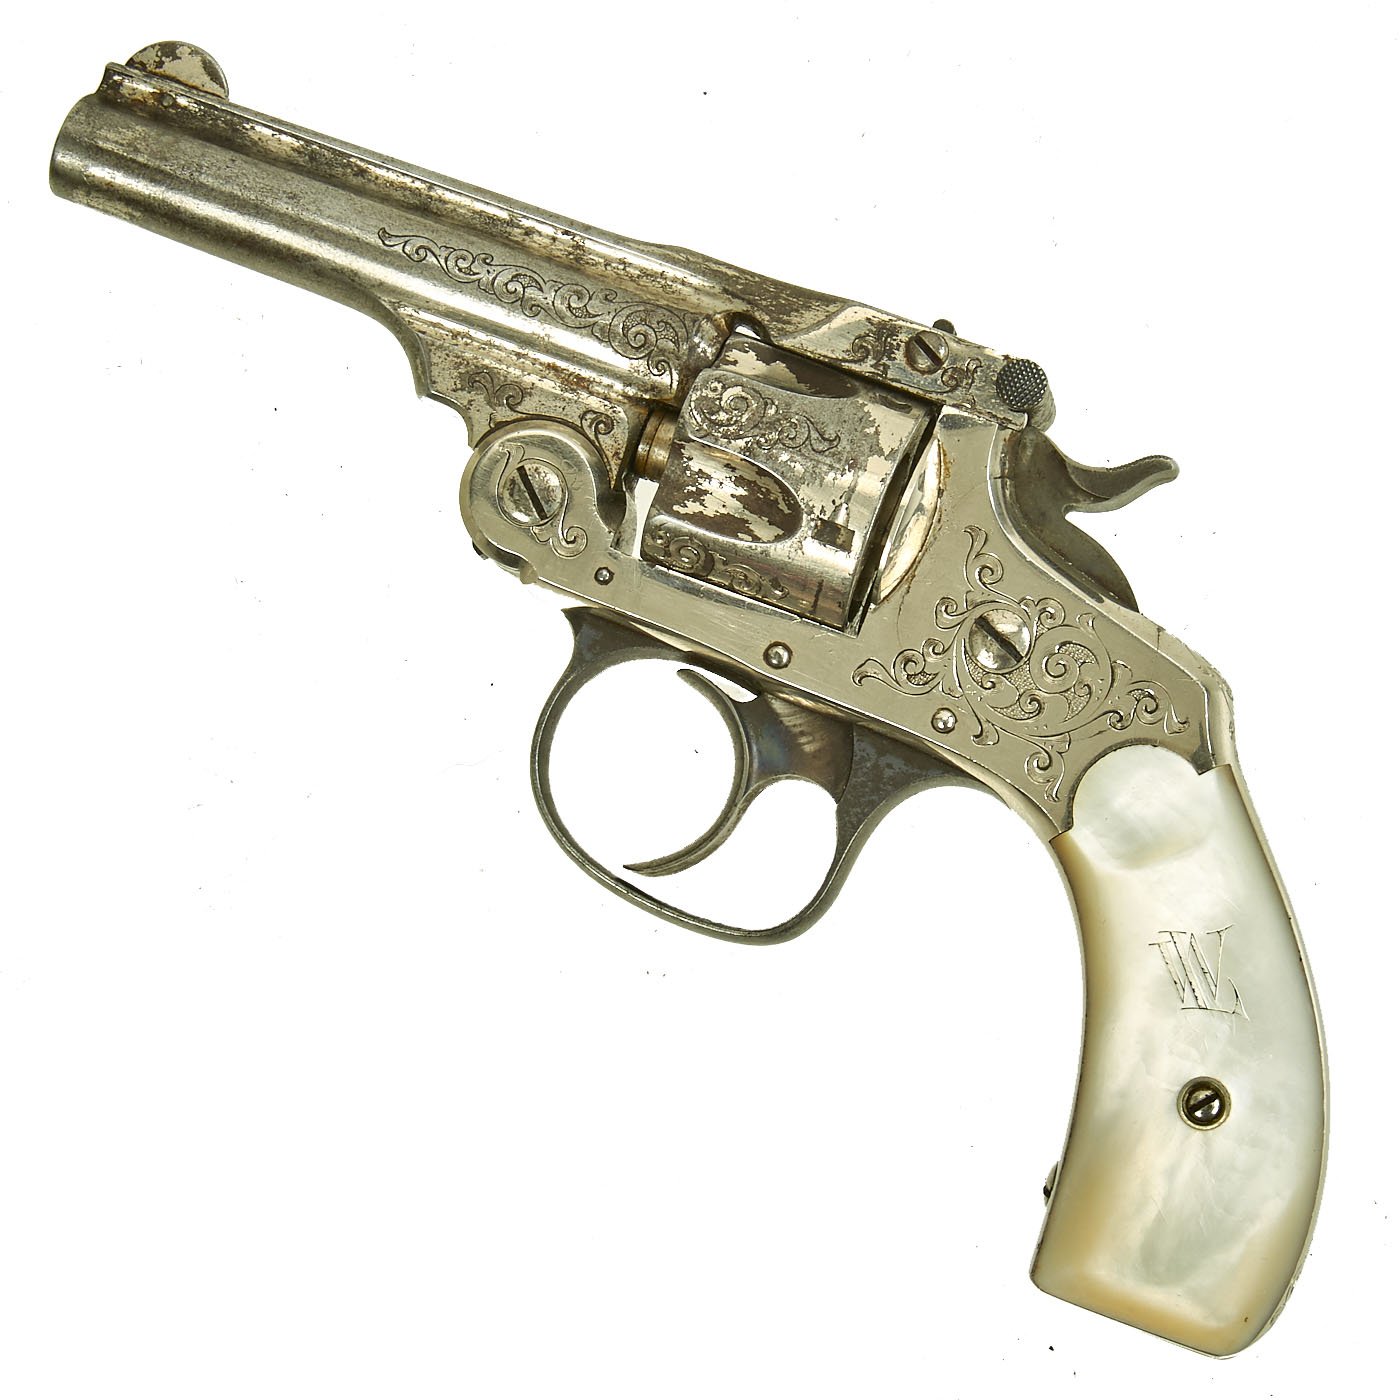 Smith & Wesson 32 Double Action Fourth Model revolver for sale.